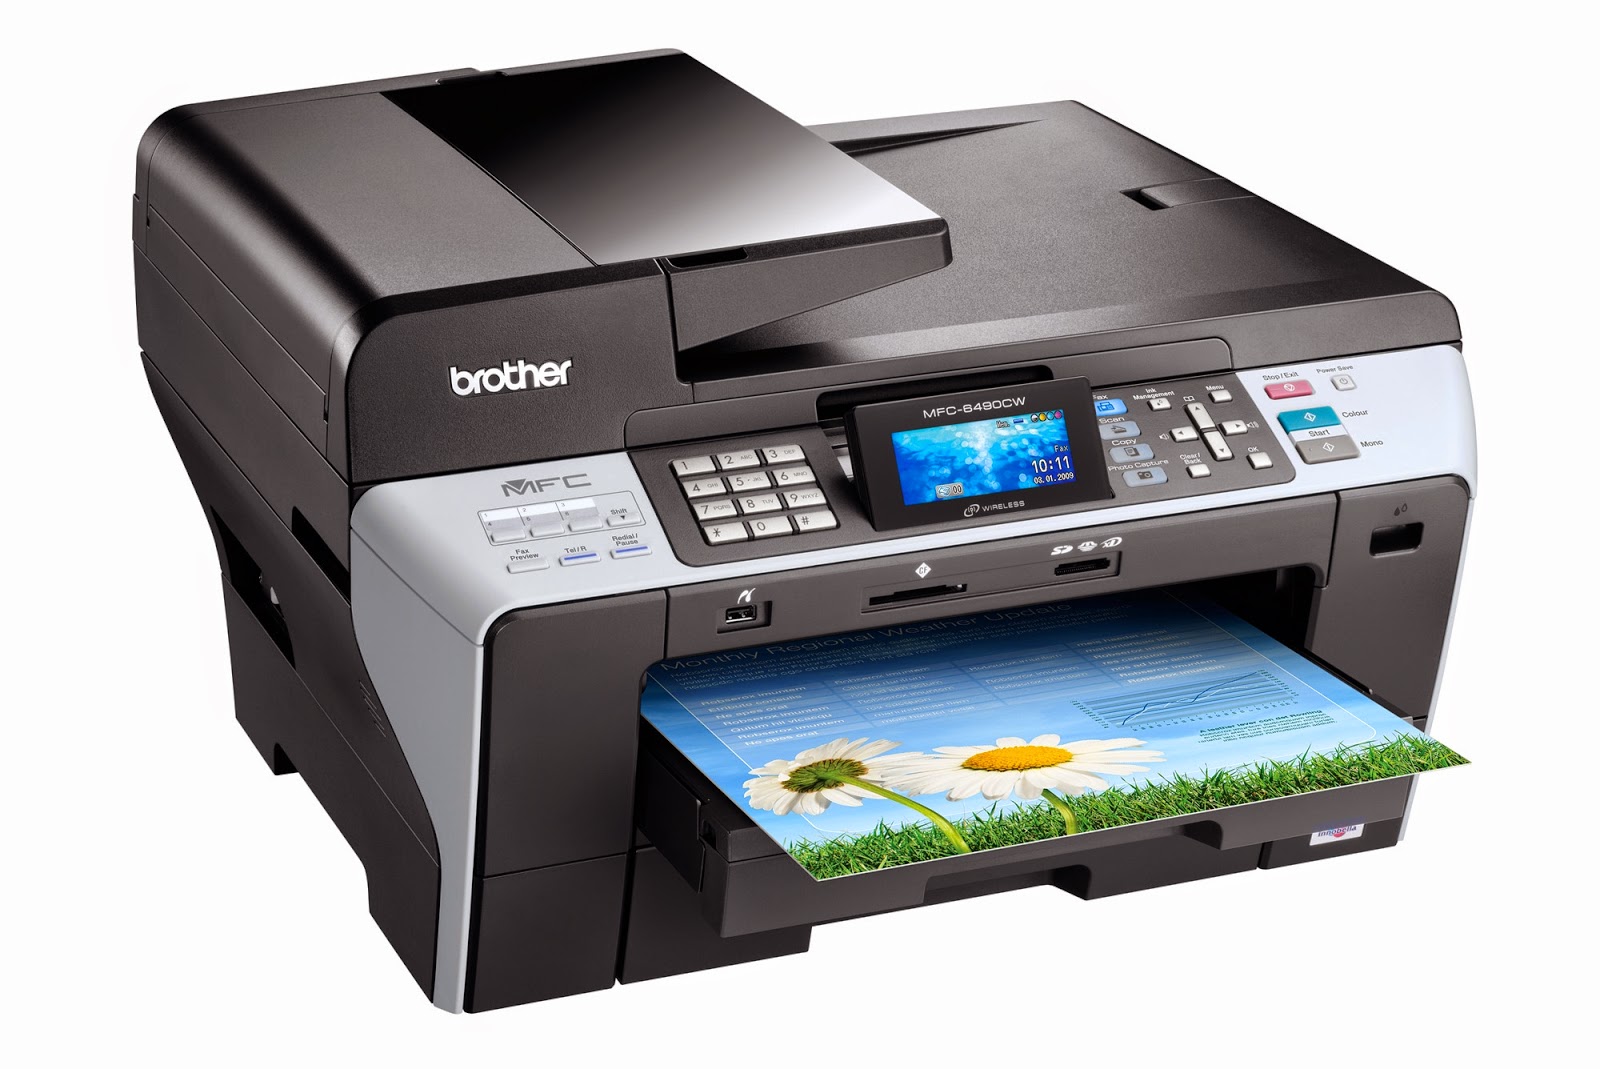 printer driver download Brother MFC-6490CW